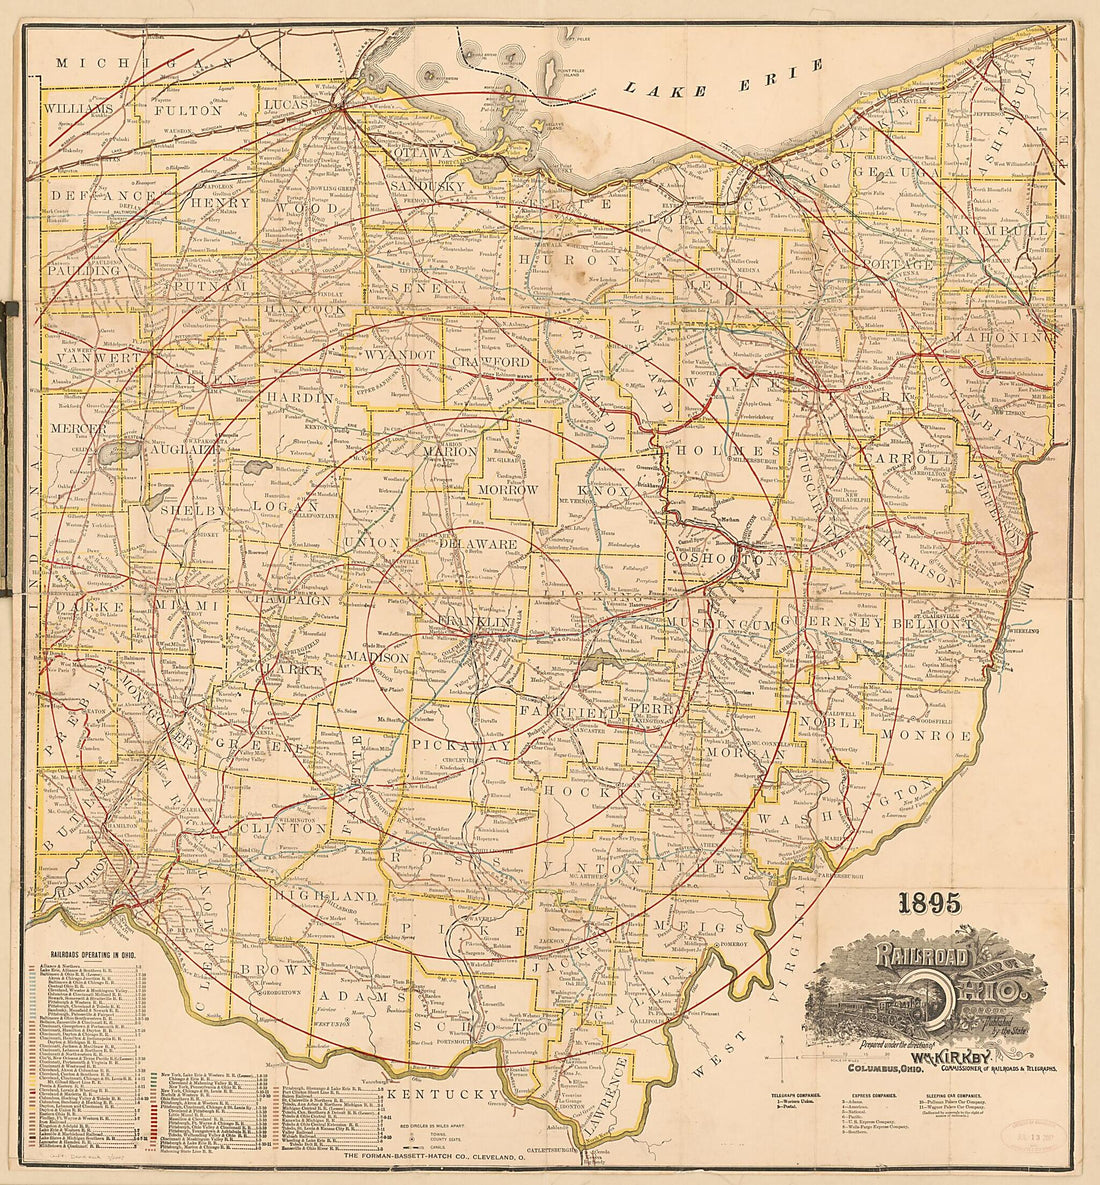 This old map of Railroad Map of Ohio (Ohio Railway Map) from 1895 was created by William Kirkby,  Ohio. Commissioner of Railroads and Telegraphs in 1895